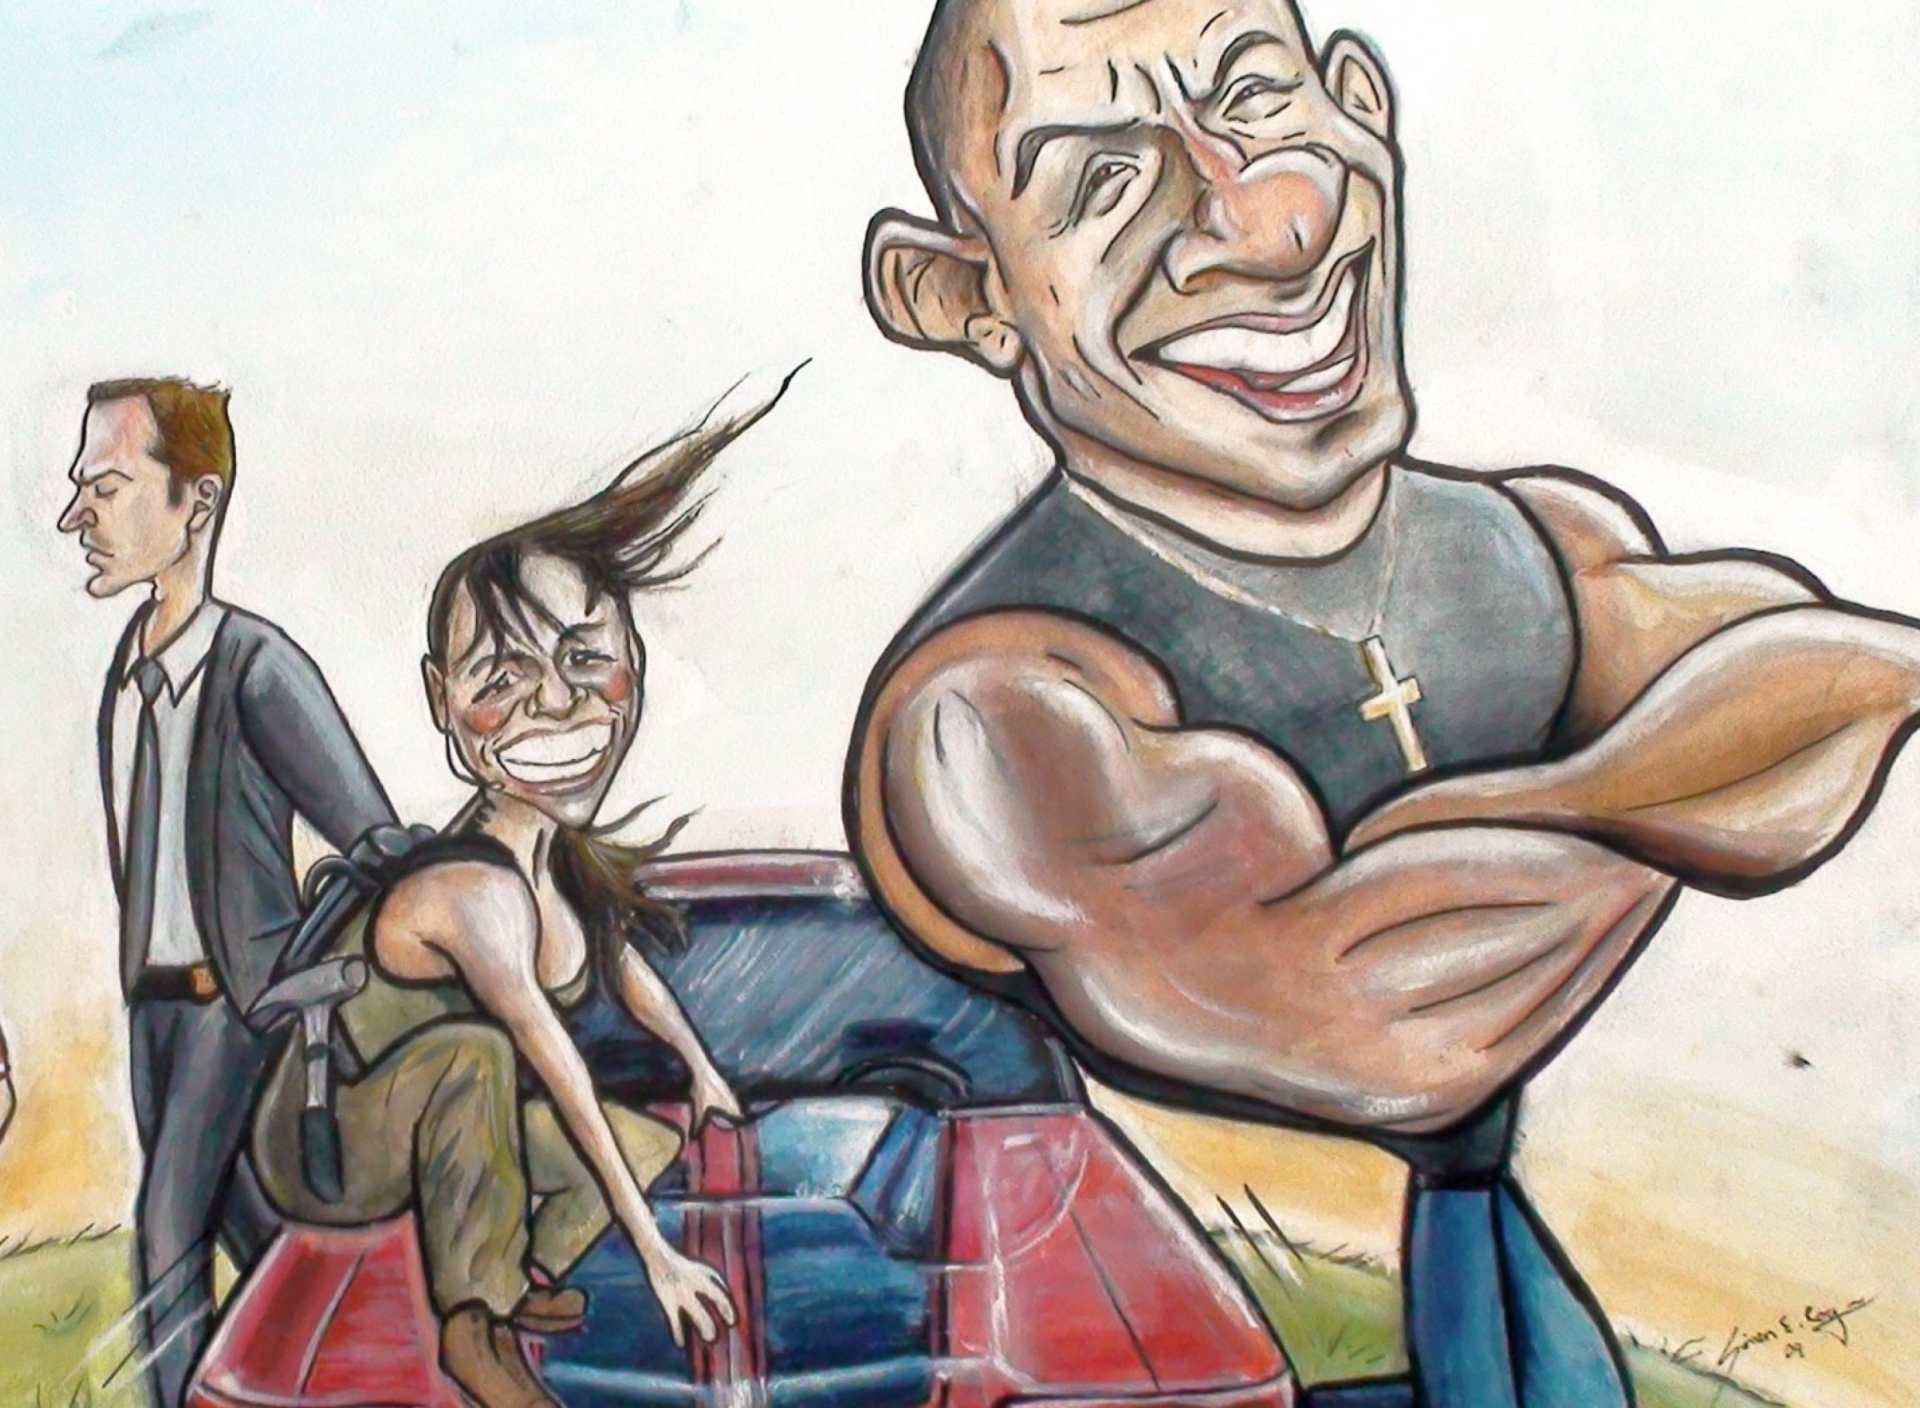 Das Vin Diesel Drawing - Fast And Furious Wallpaper 1920x1408